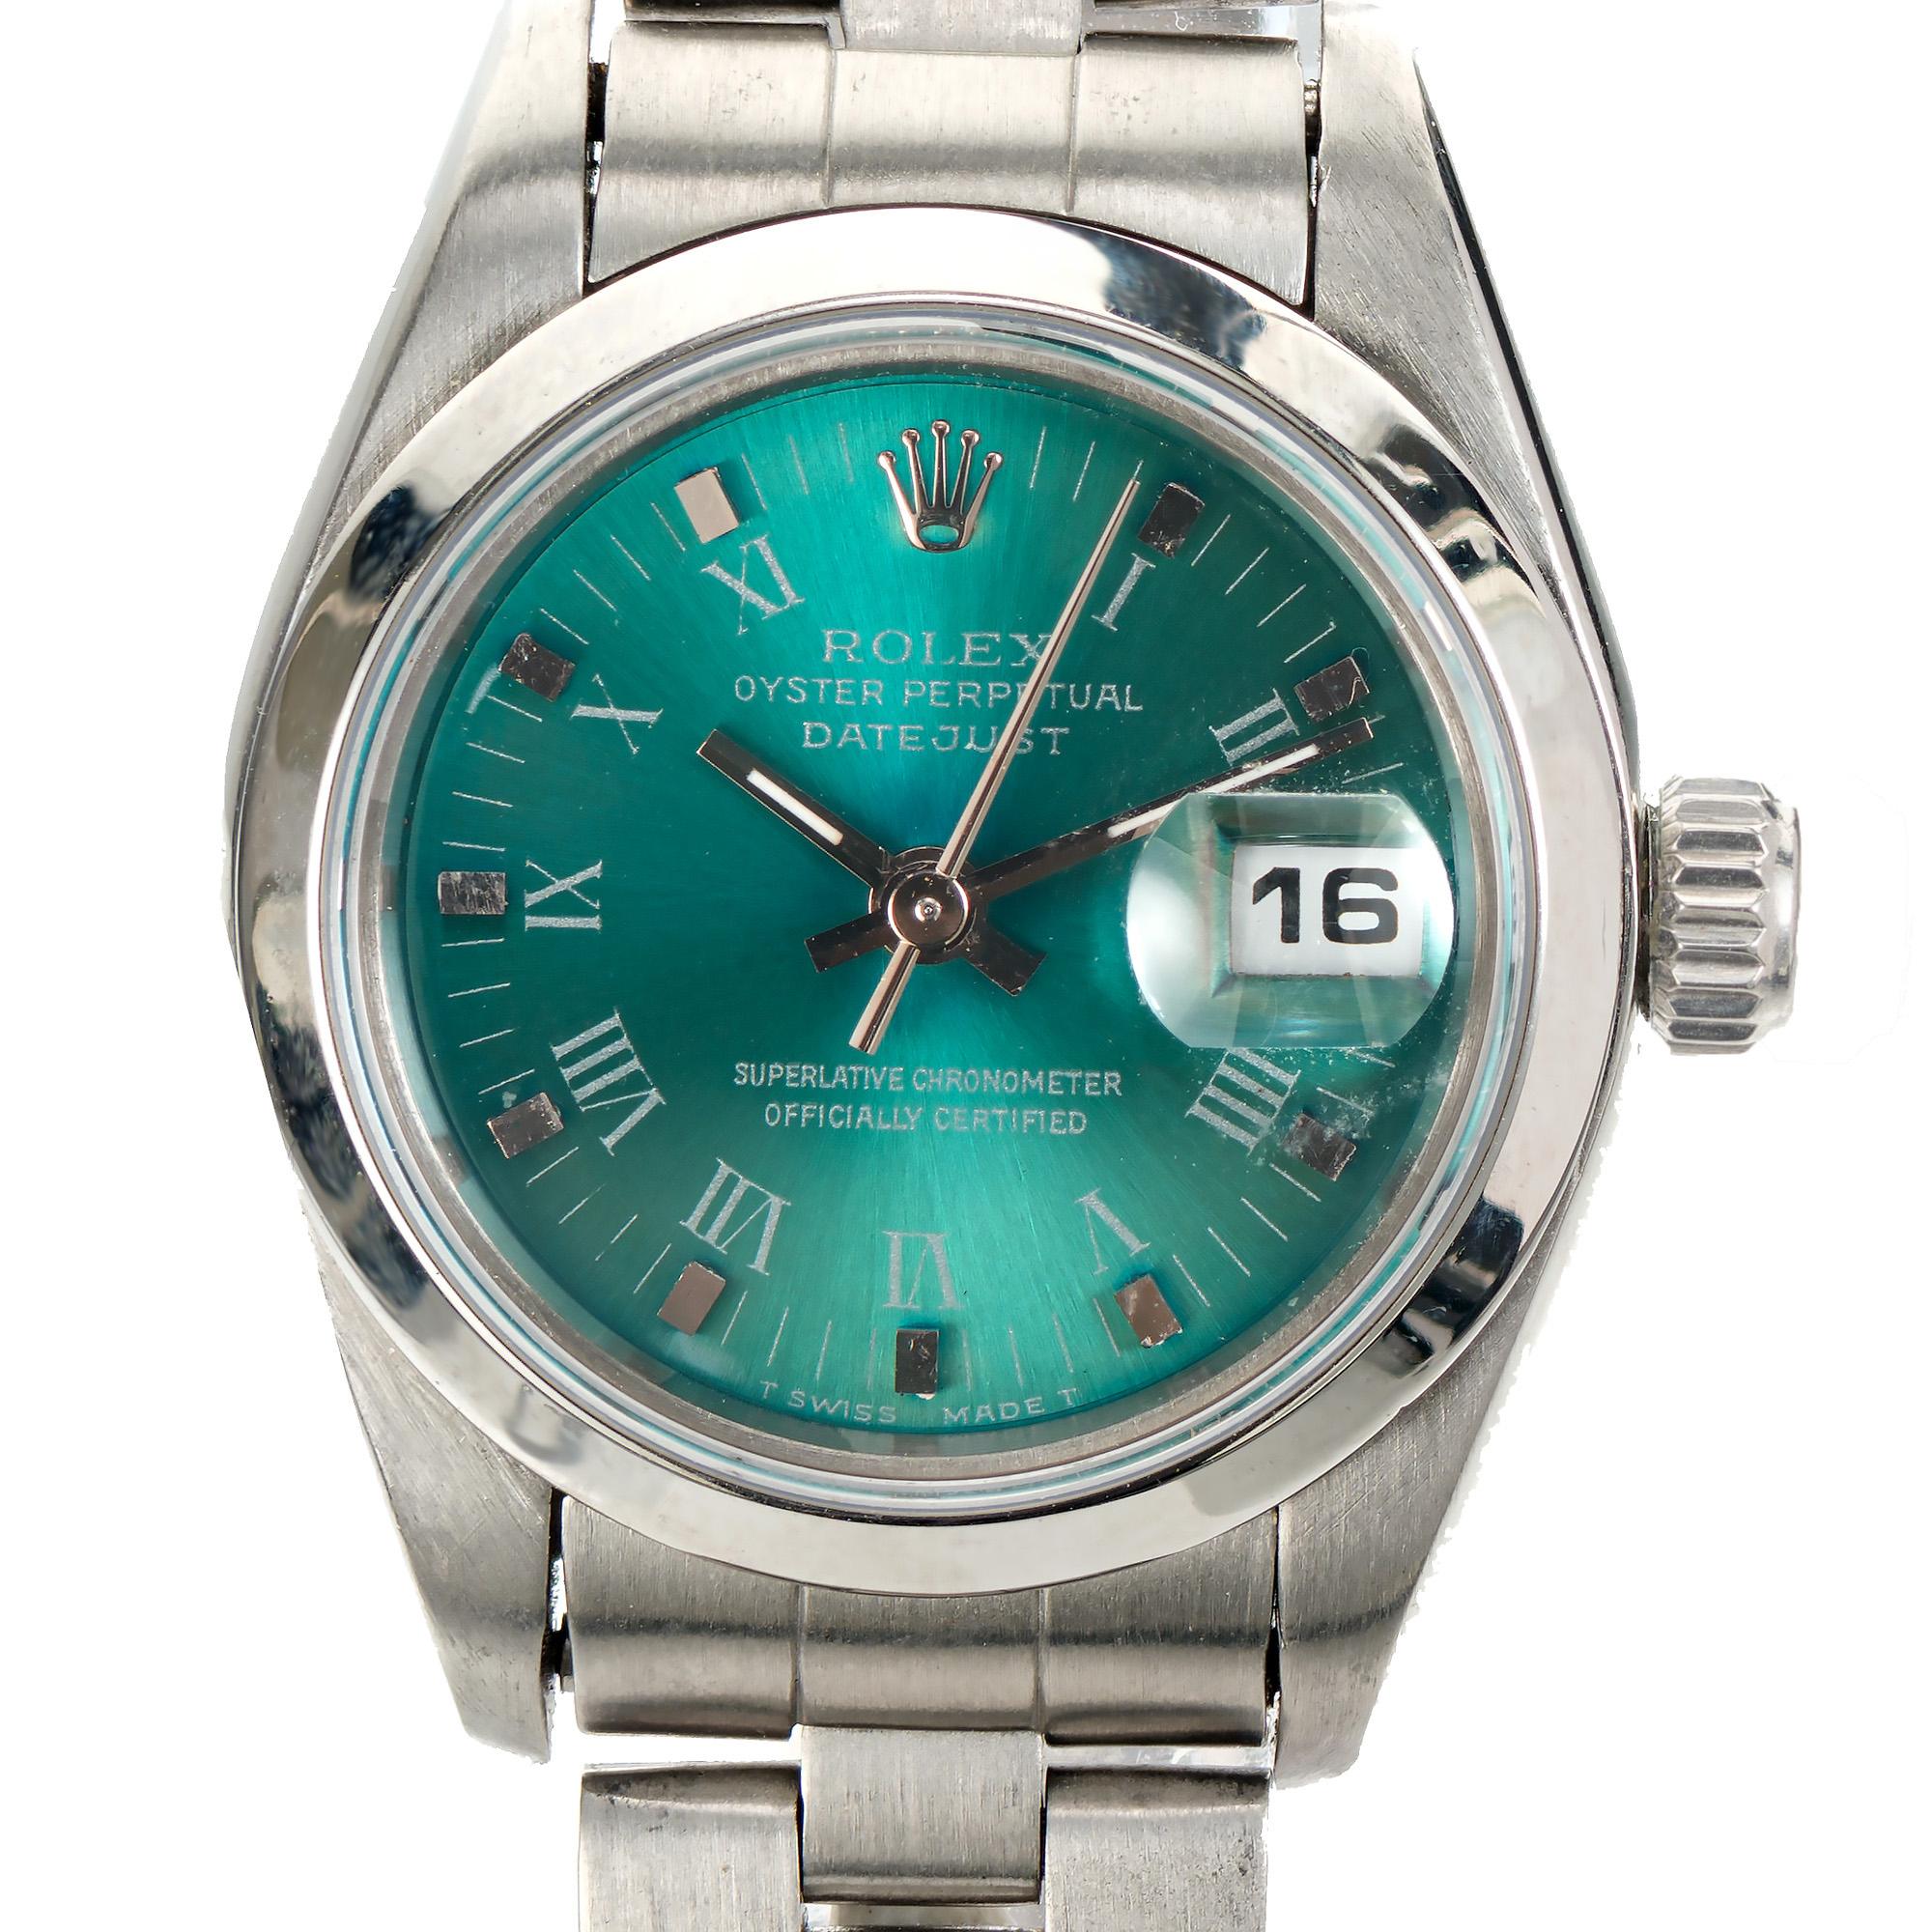 Rolex 69160 with plain bezel and Rolex Oyster band. Original Rolex dial has been refinished and custom colored a bright high lustre greenish/blue with multiple layers by the Peter Suchy Workshop. Circa 1994. Please note that the the dial is not the